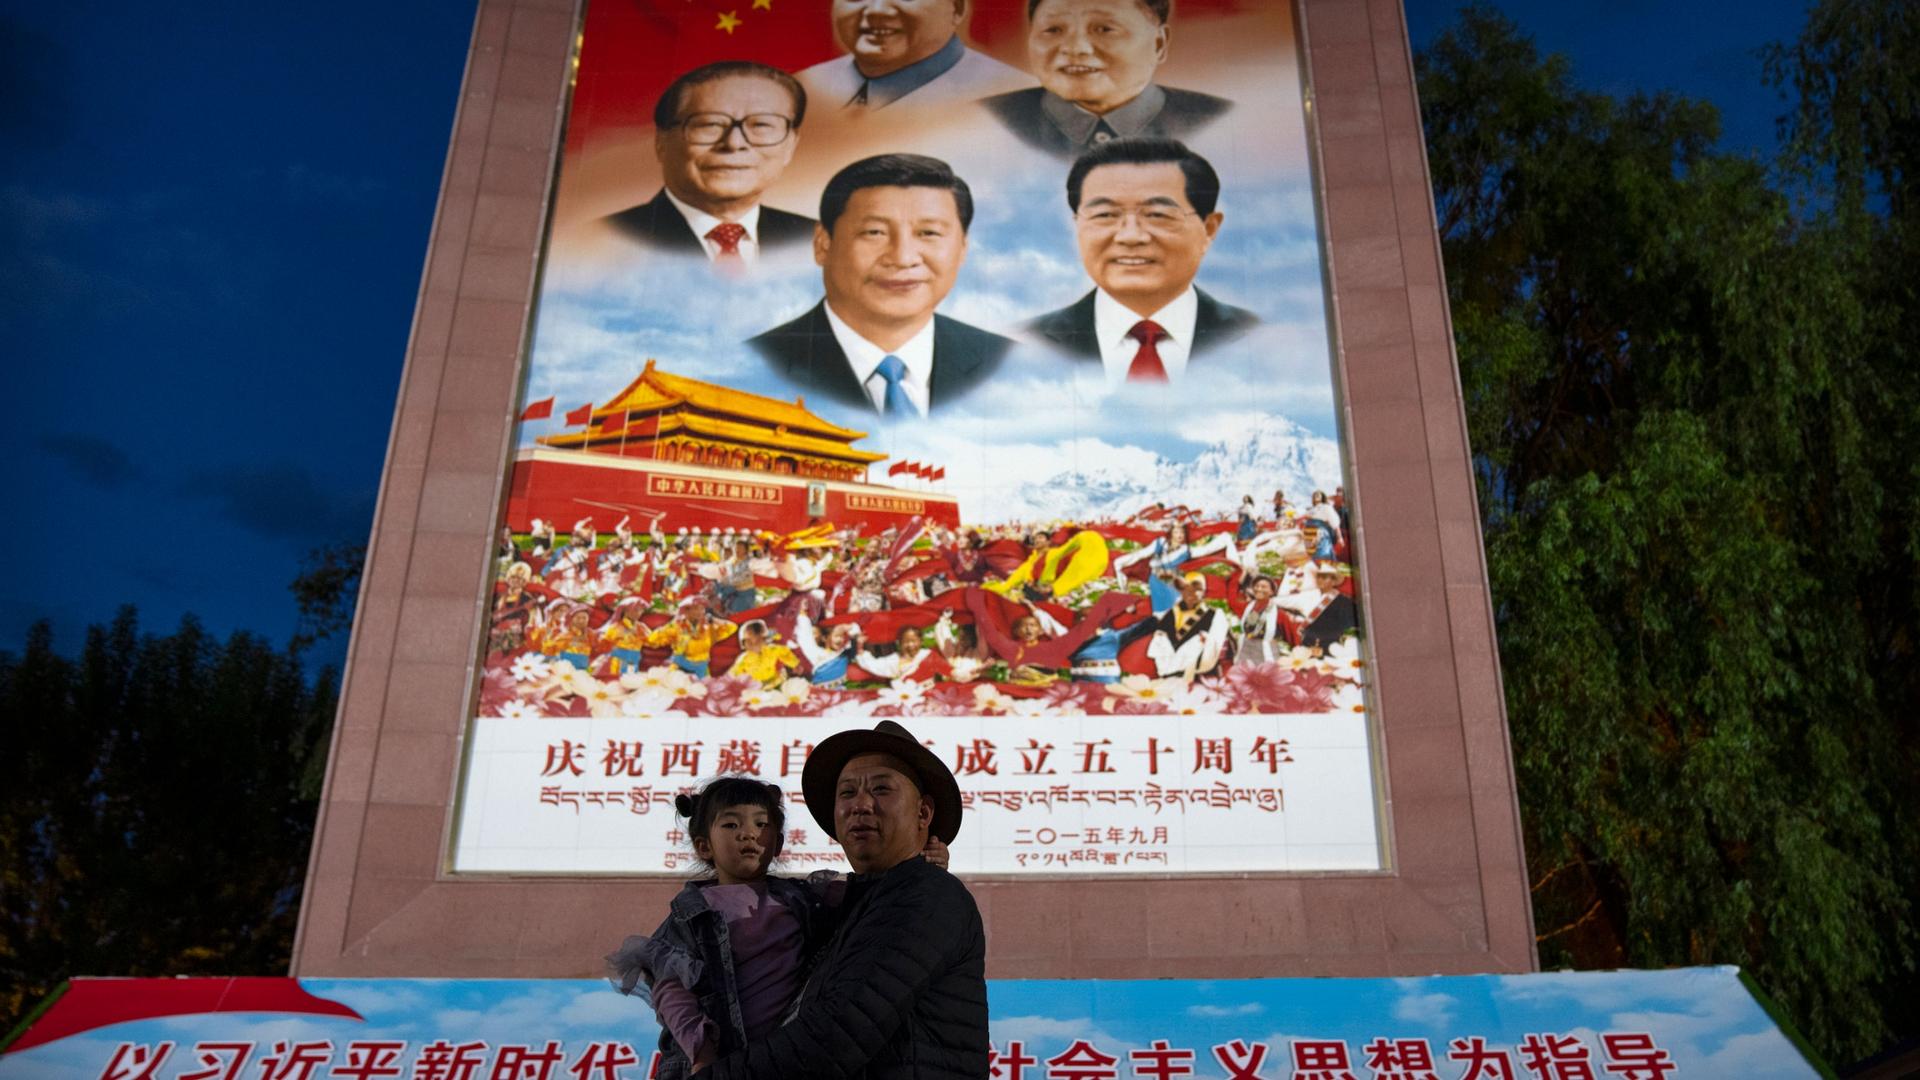 A man holds a girl as they pose for a photo in front of a large mural depicting Chinese President Xi Jinping, bottom center, and other Chinese leaders at a public square at the base of the Potala Palace in Lhasa in western China's Tibet Autonomous Region 